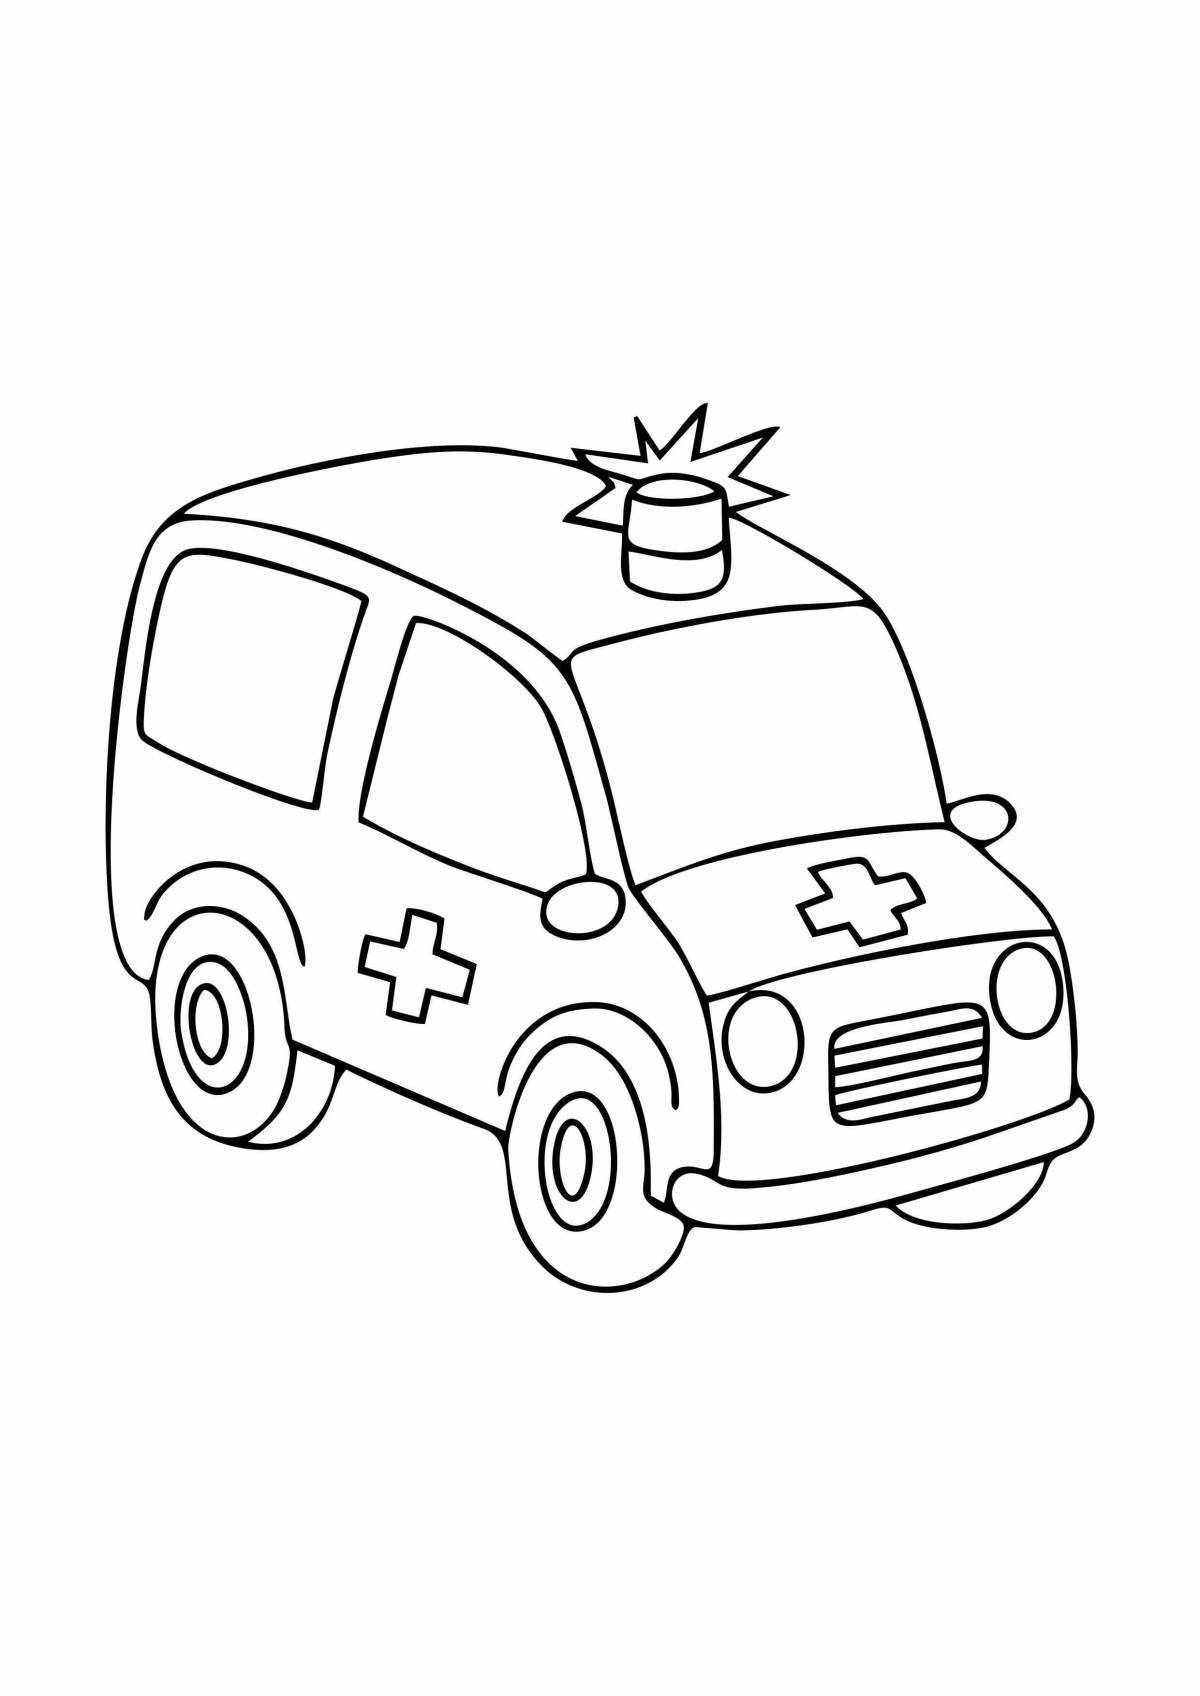 Coloring cars for kids